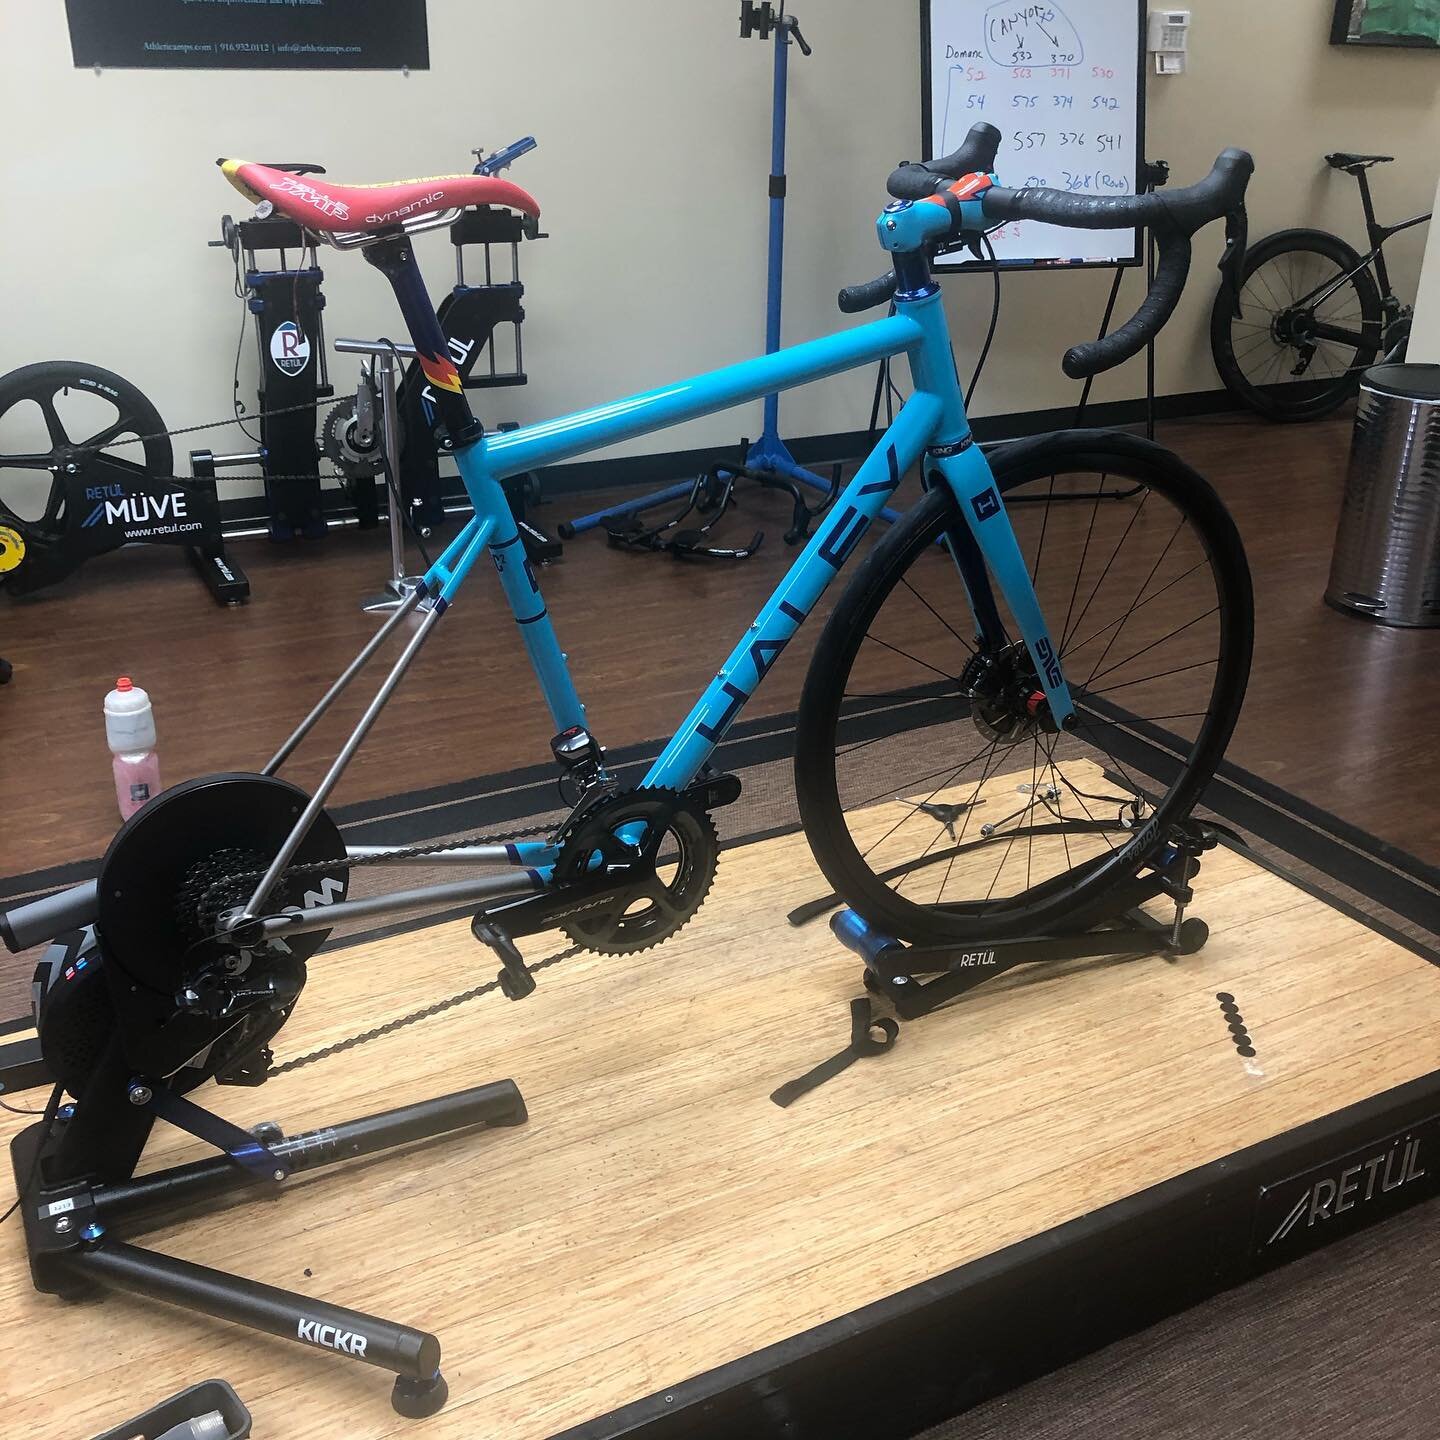 Getting the fit set up on the new ride at @athleticamps 
This full custom road can be seen around the roads of Folsom and Granite Bay, California. 
Paint inspired by @jimmy_whippet 
.
.
.
@mc2sports 
@athleticamps 
#custombike 
#madeinusa 
#customfit